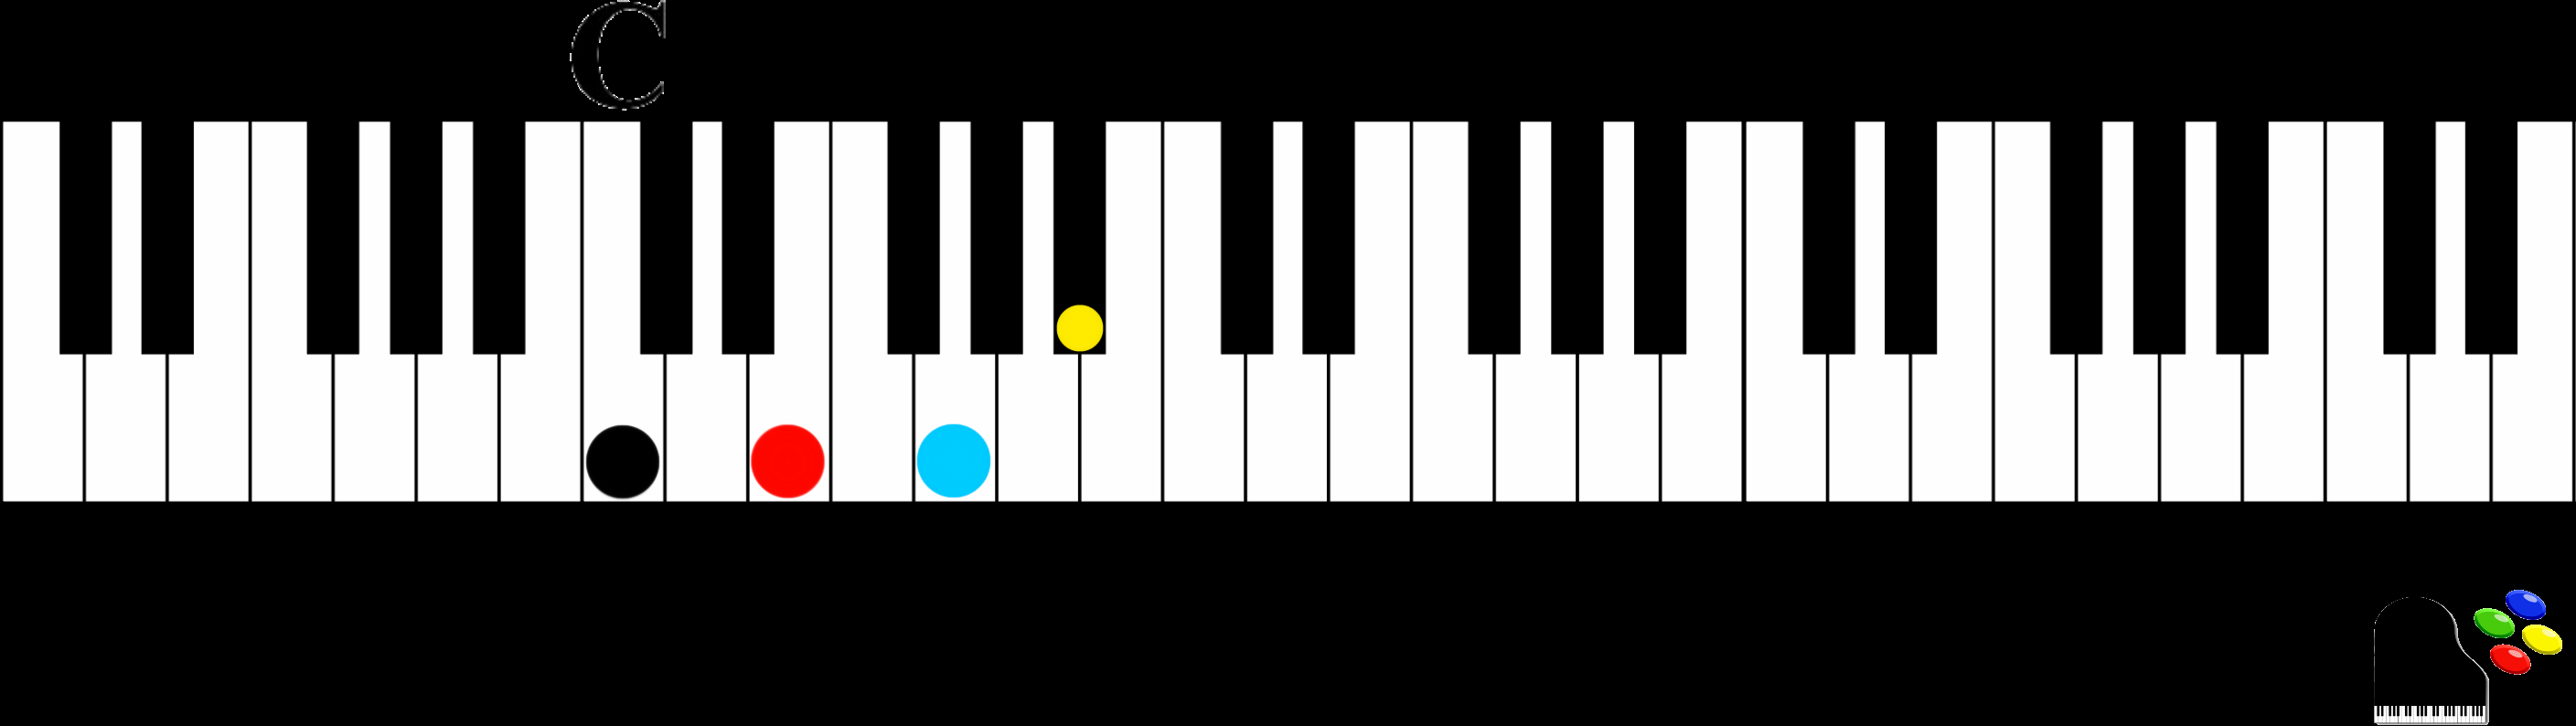 F# Piano Chord How To Easily Play Dominant 7th Chords On The Piano